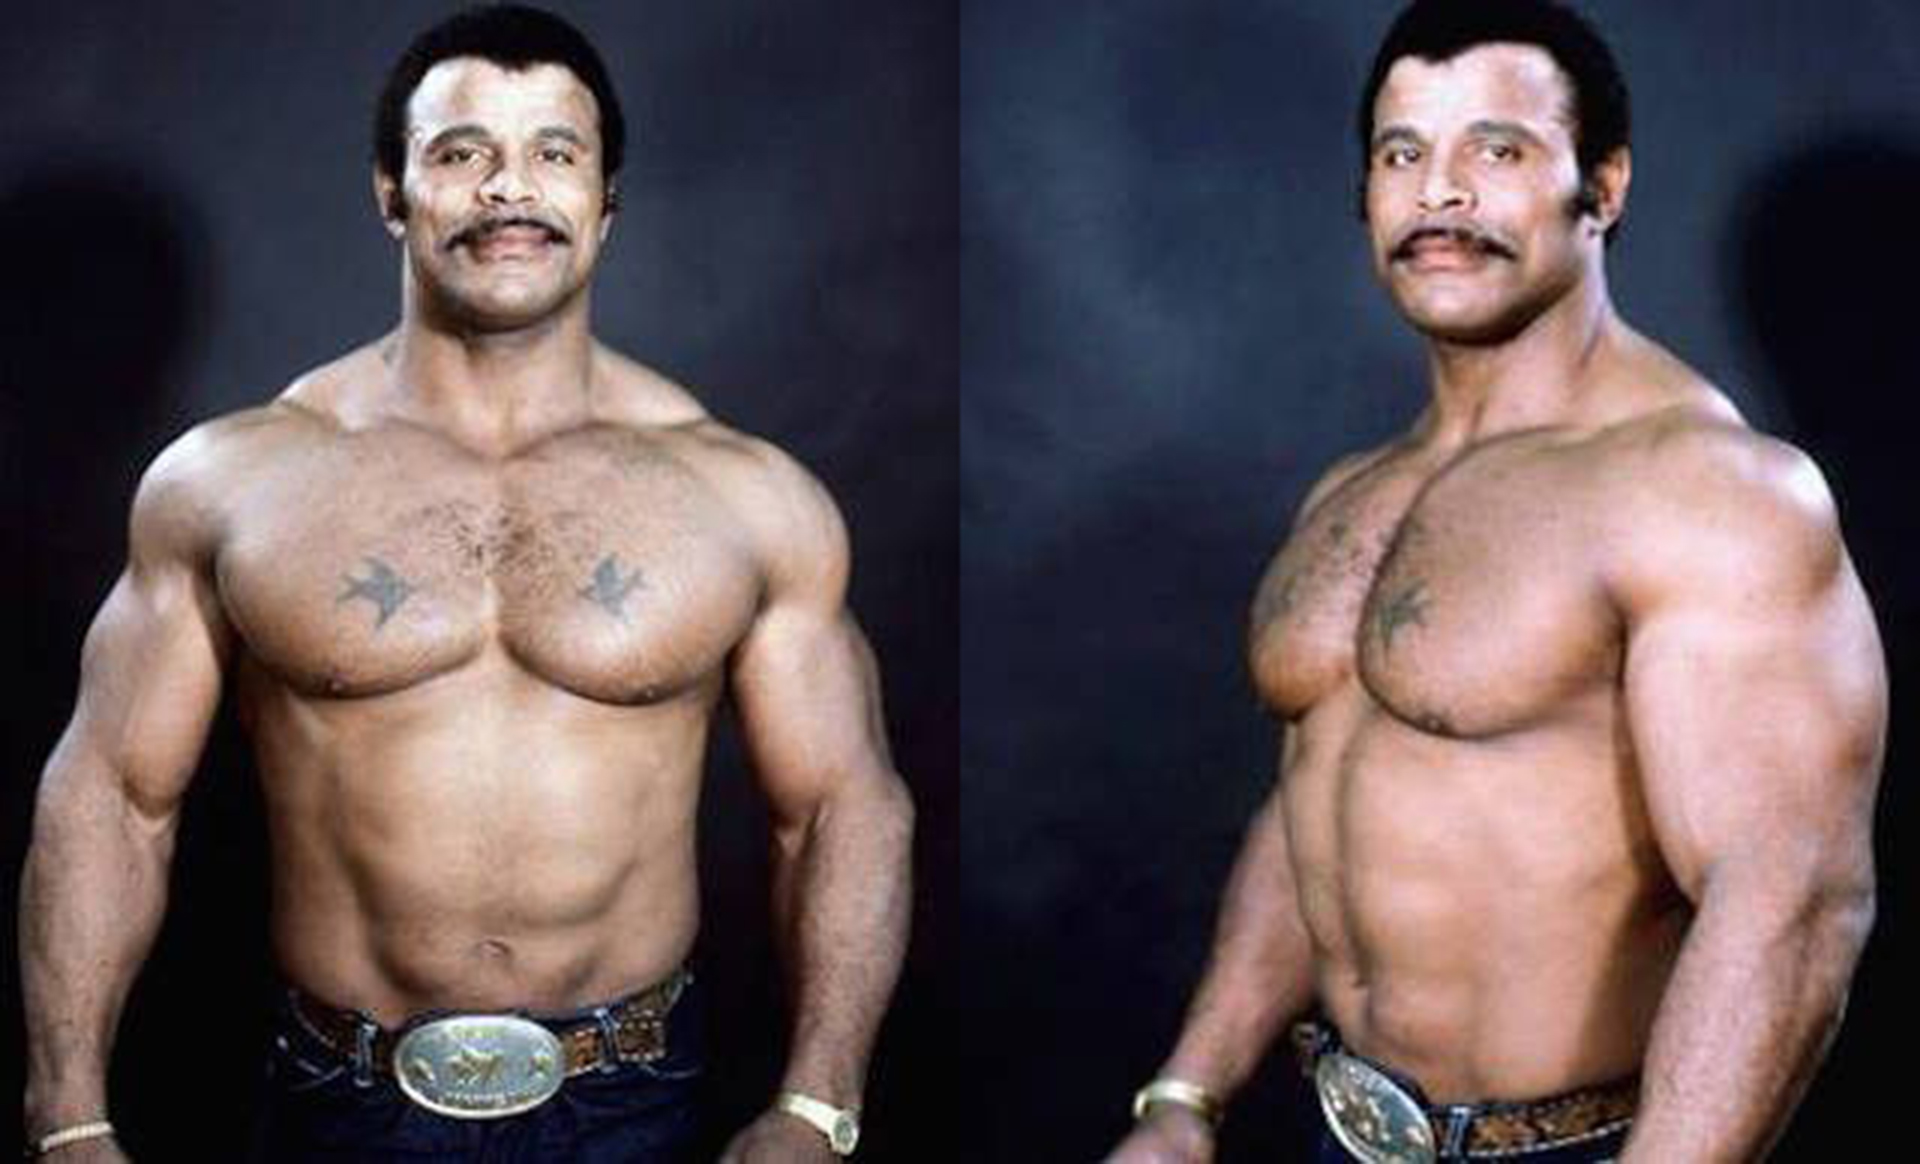 Rocky Johnson, father of "rock"who was a professional wrestler in the 70s and 80s.